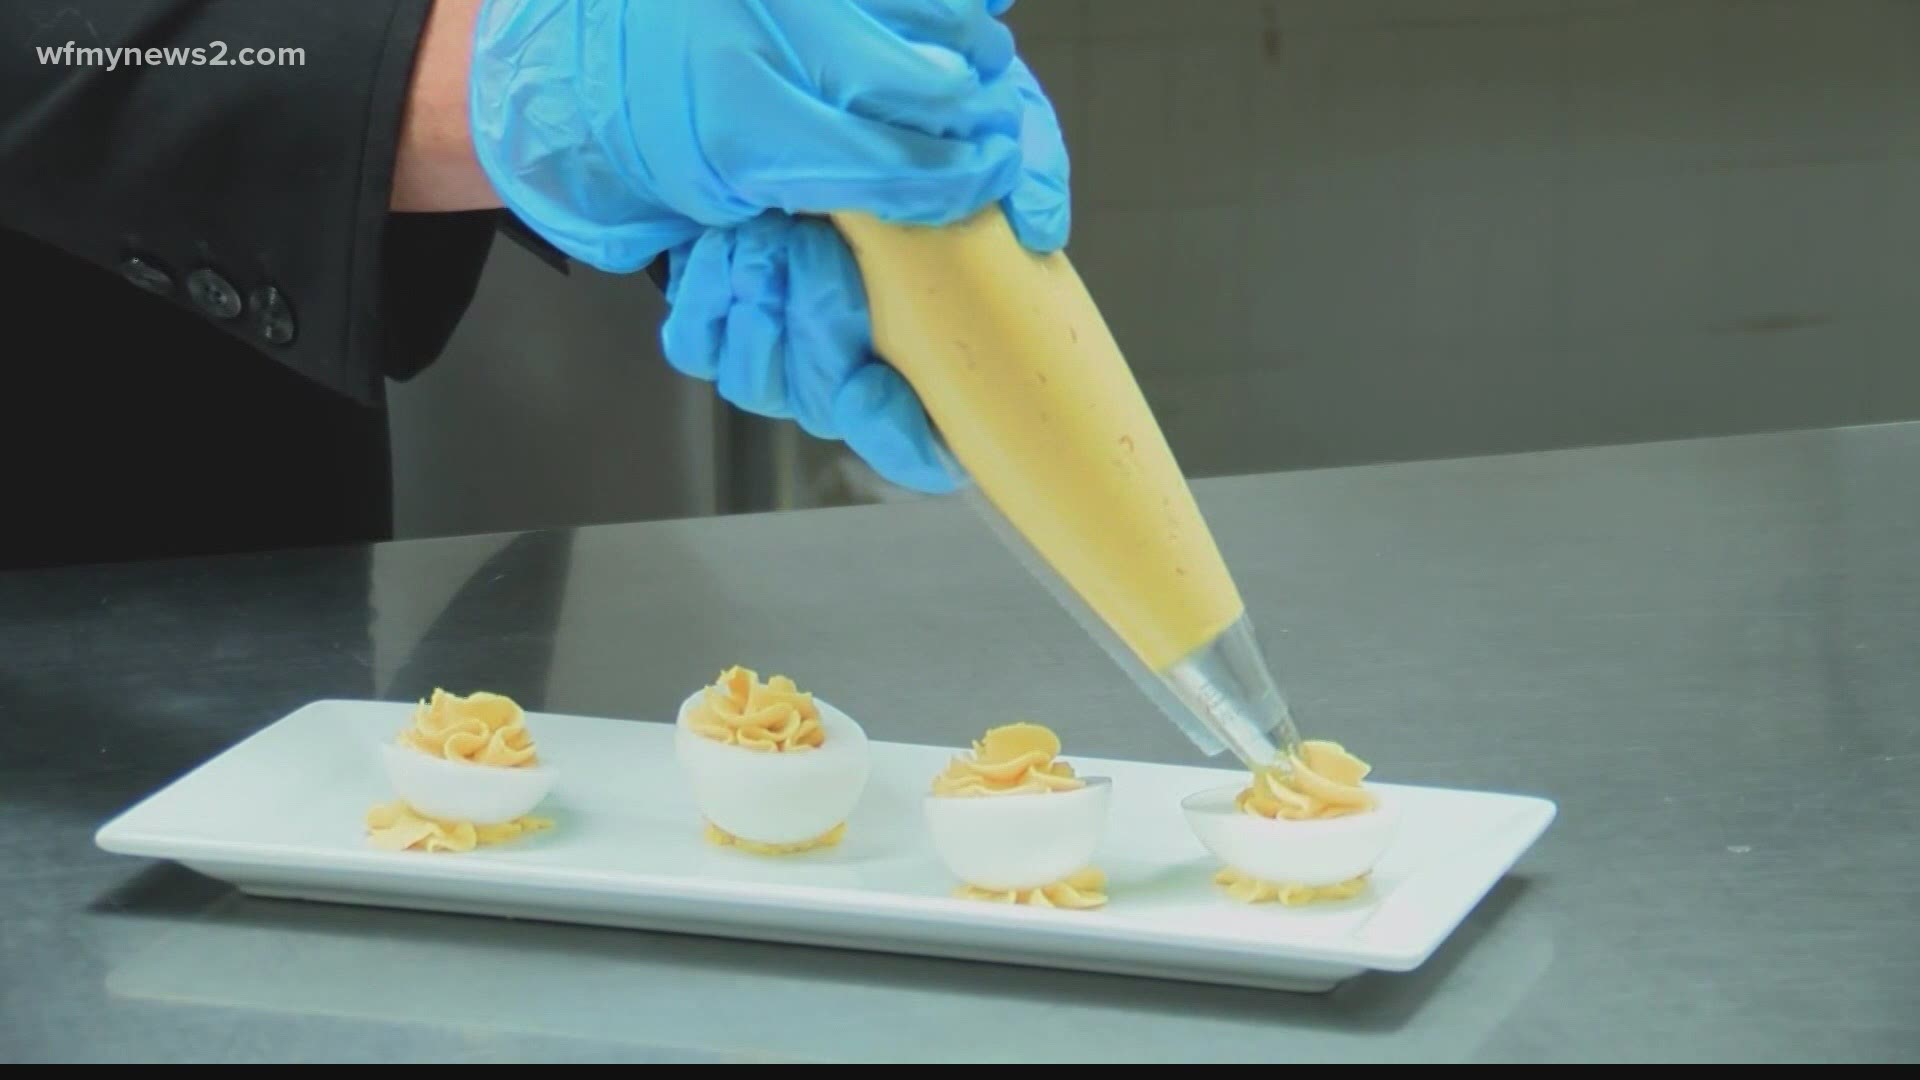 Now you can get the perfect deviled eggs delivered right to your door.